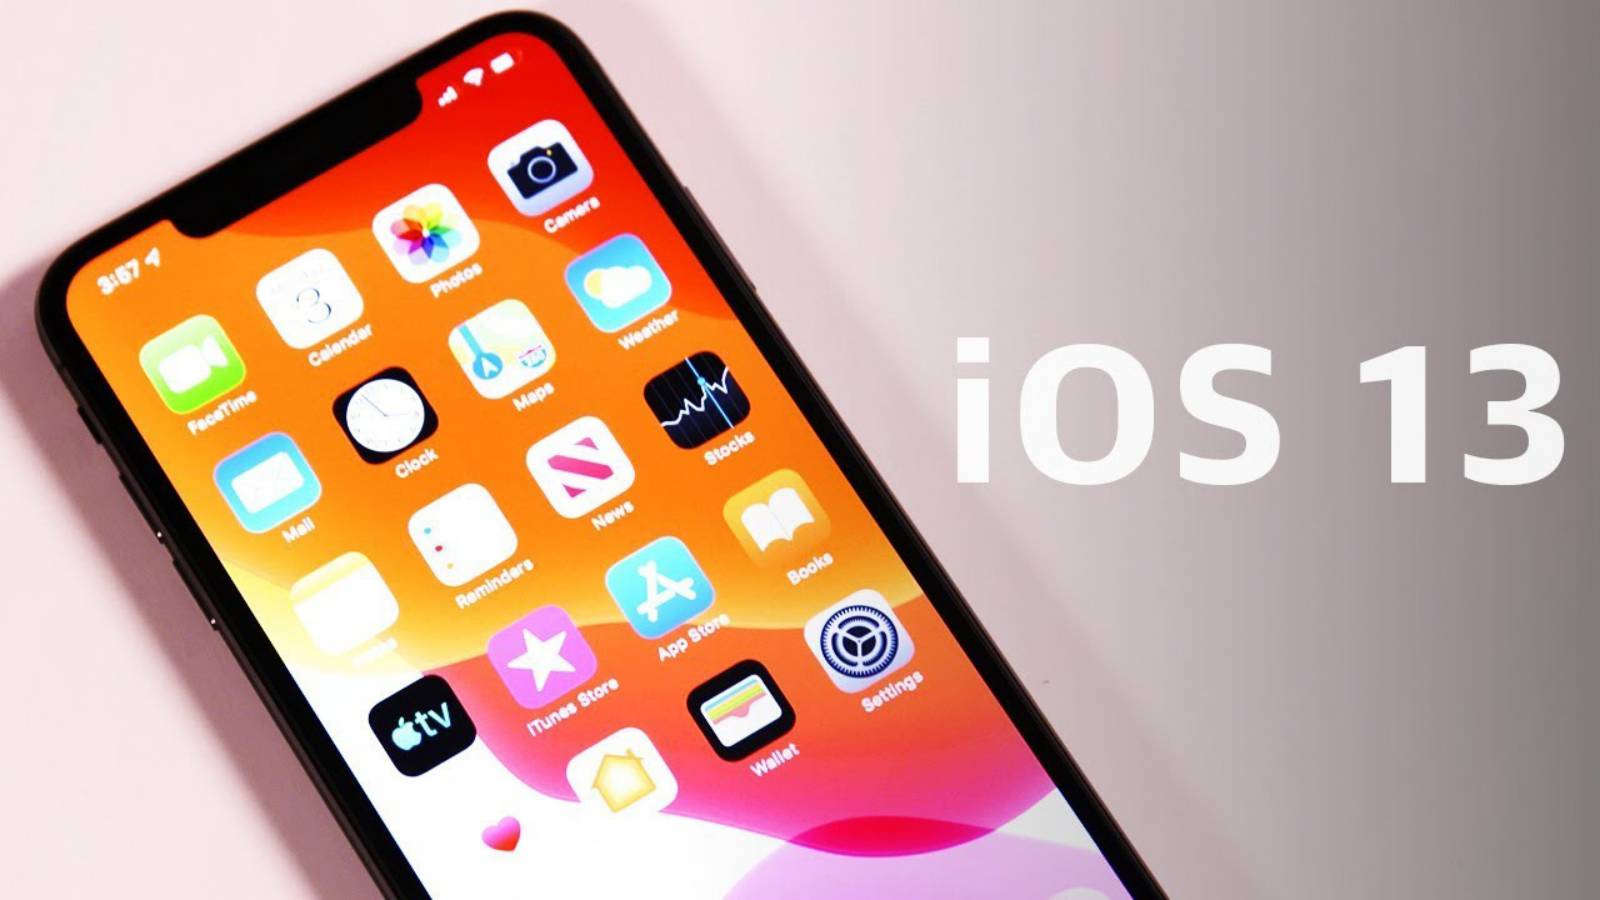 iOS 13. CONFUSION Generated by Apple for iPhone and iPad